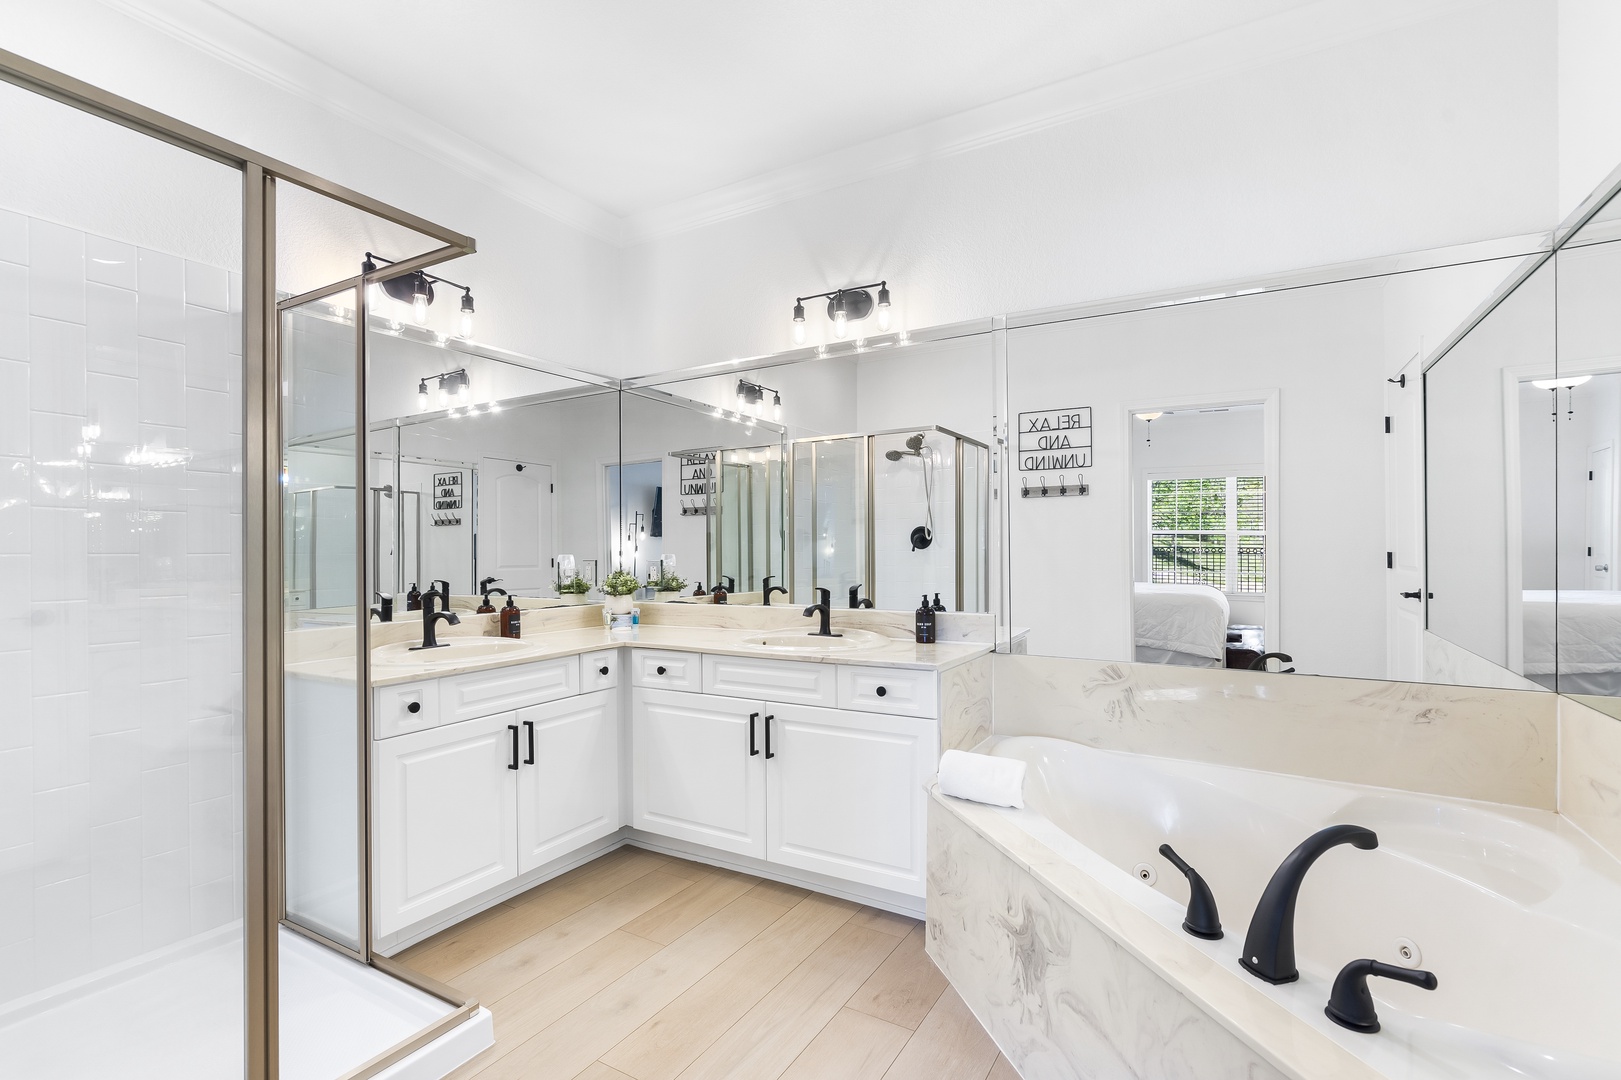 King ensuite boasts a large double vanity, standing shower and a jetted tub